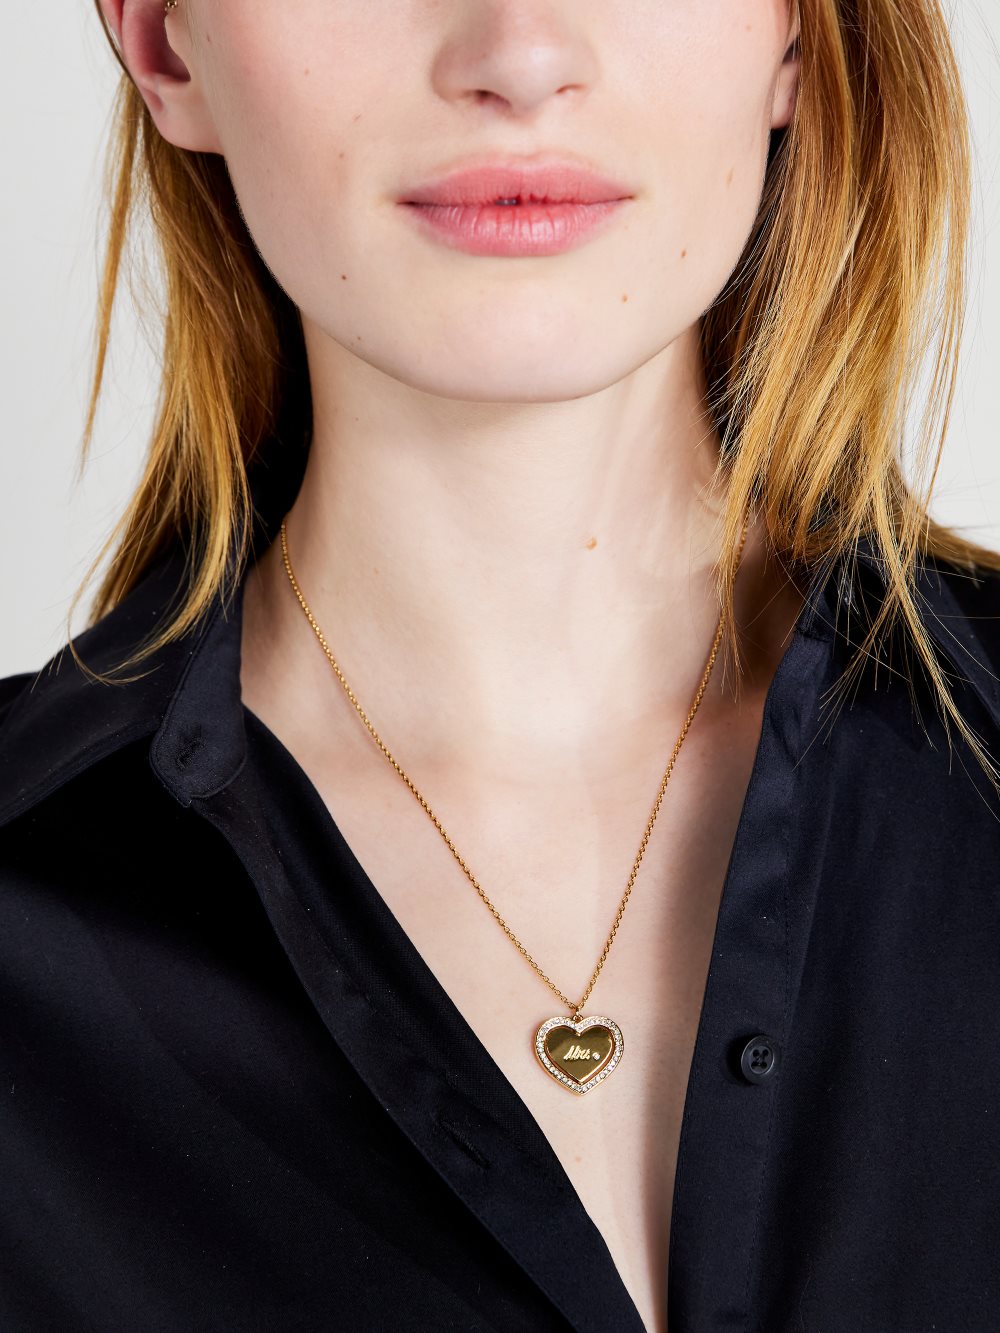 Women's clear/gold. at heart miss to mrs pendant | Kate Spade